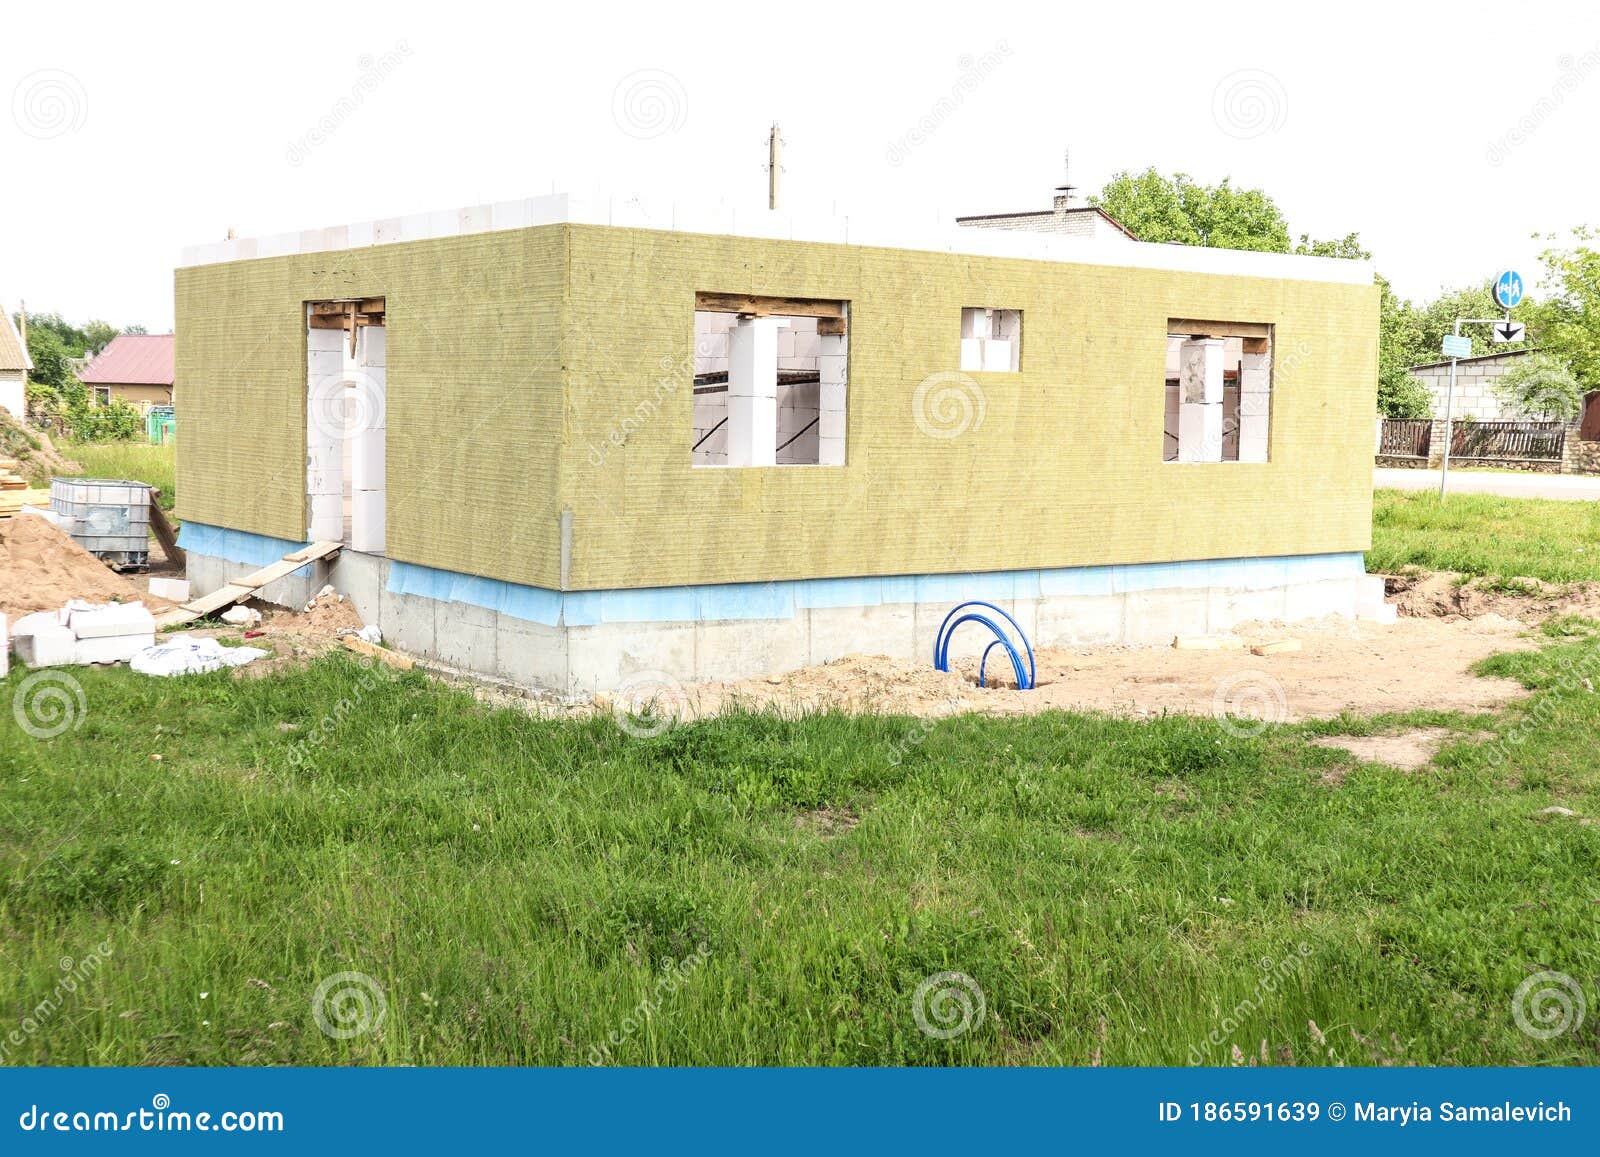 Box Of A House Under Construction On A Private Land Plot Stock Image Image Of Background High 186591639